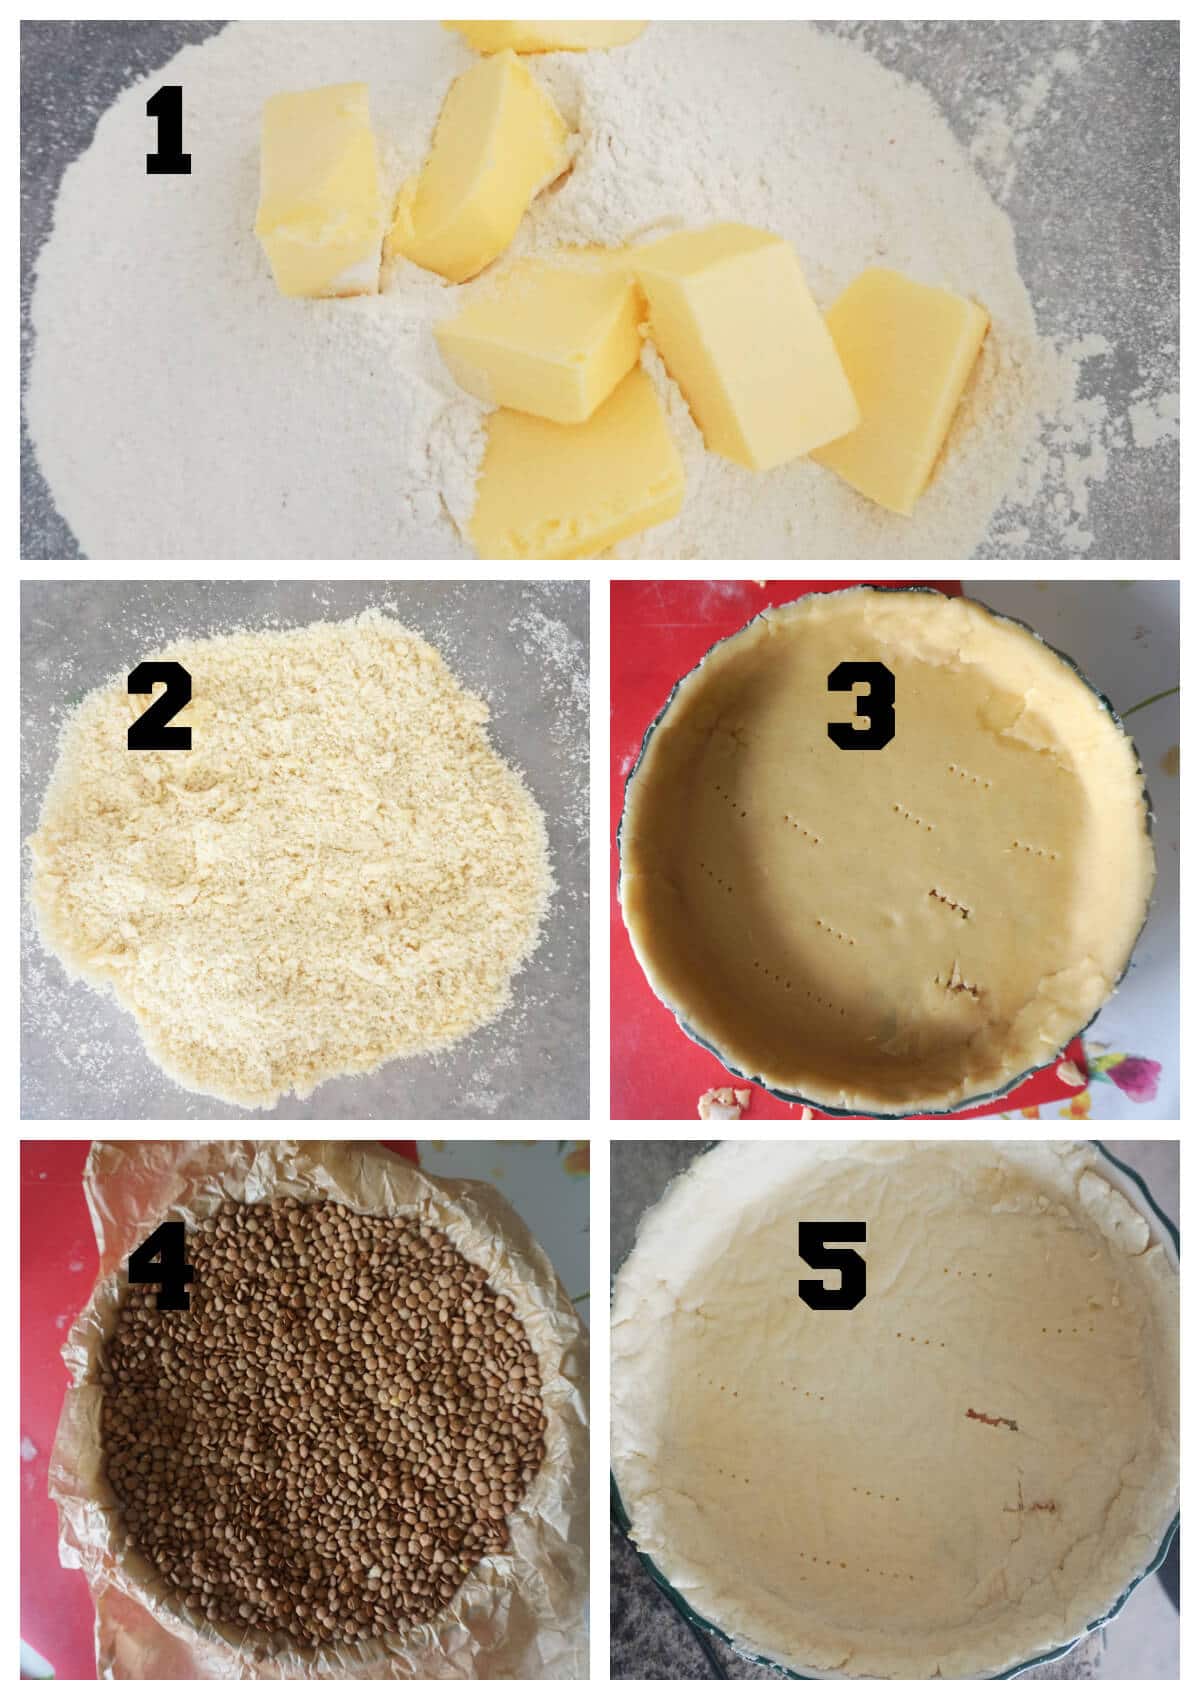 Collage of 5 photos to show how to make a quiche pastry.